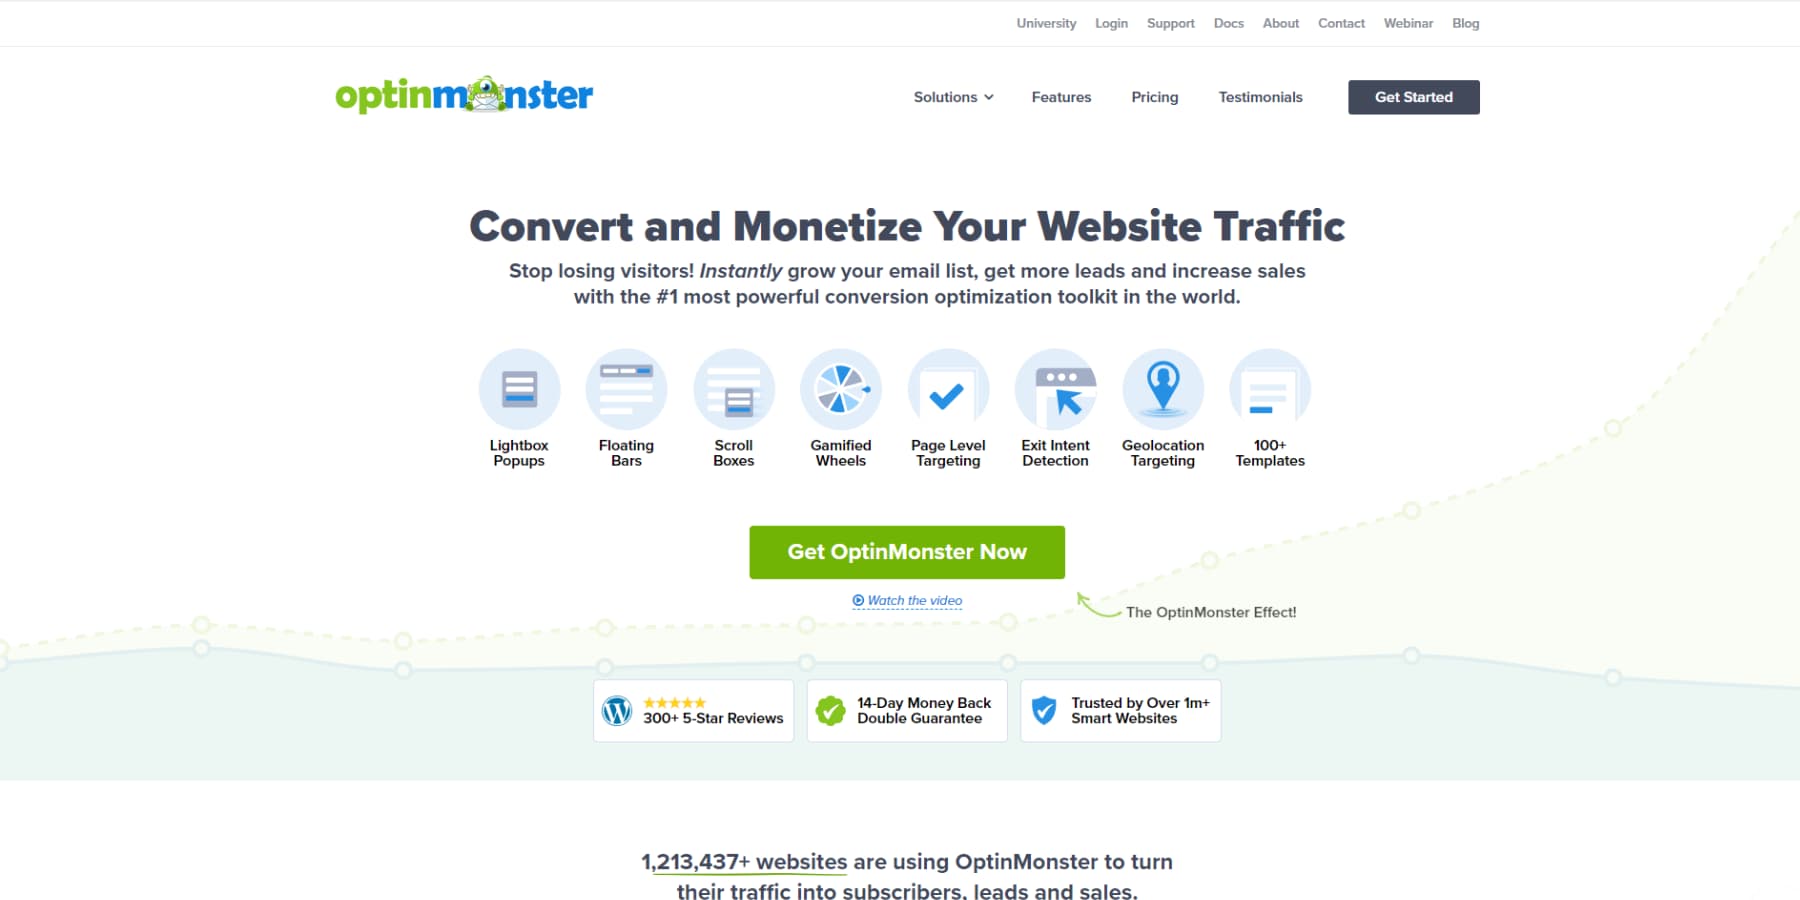 A screenshot of OptinMonster's home page